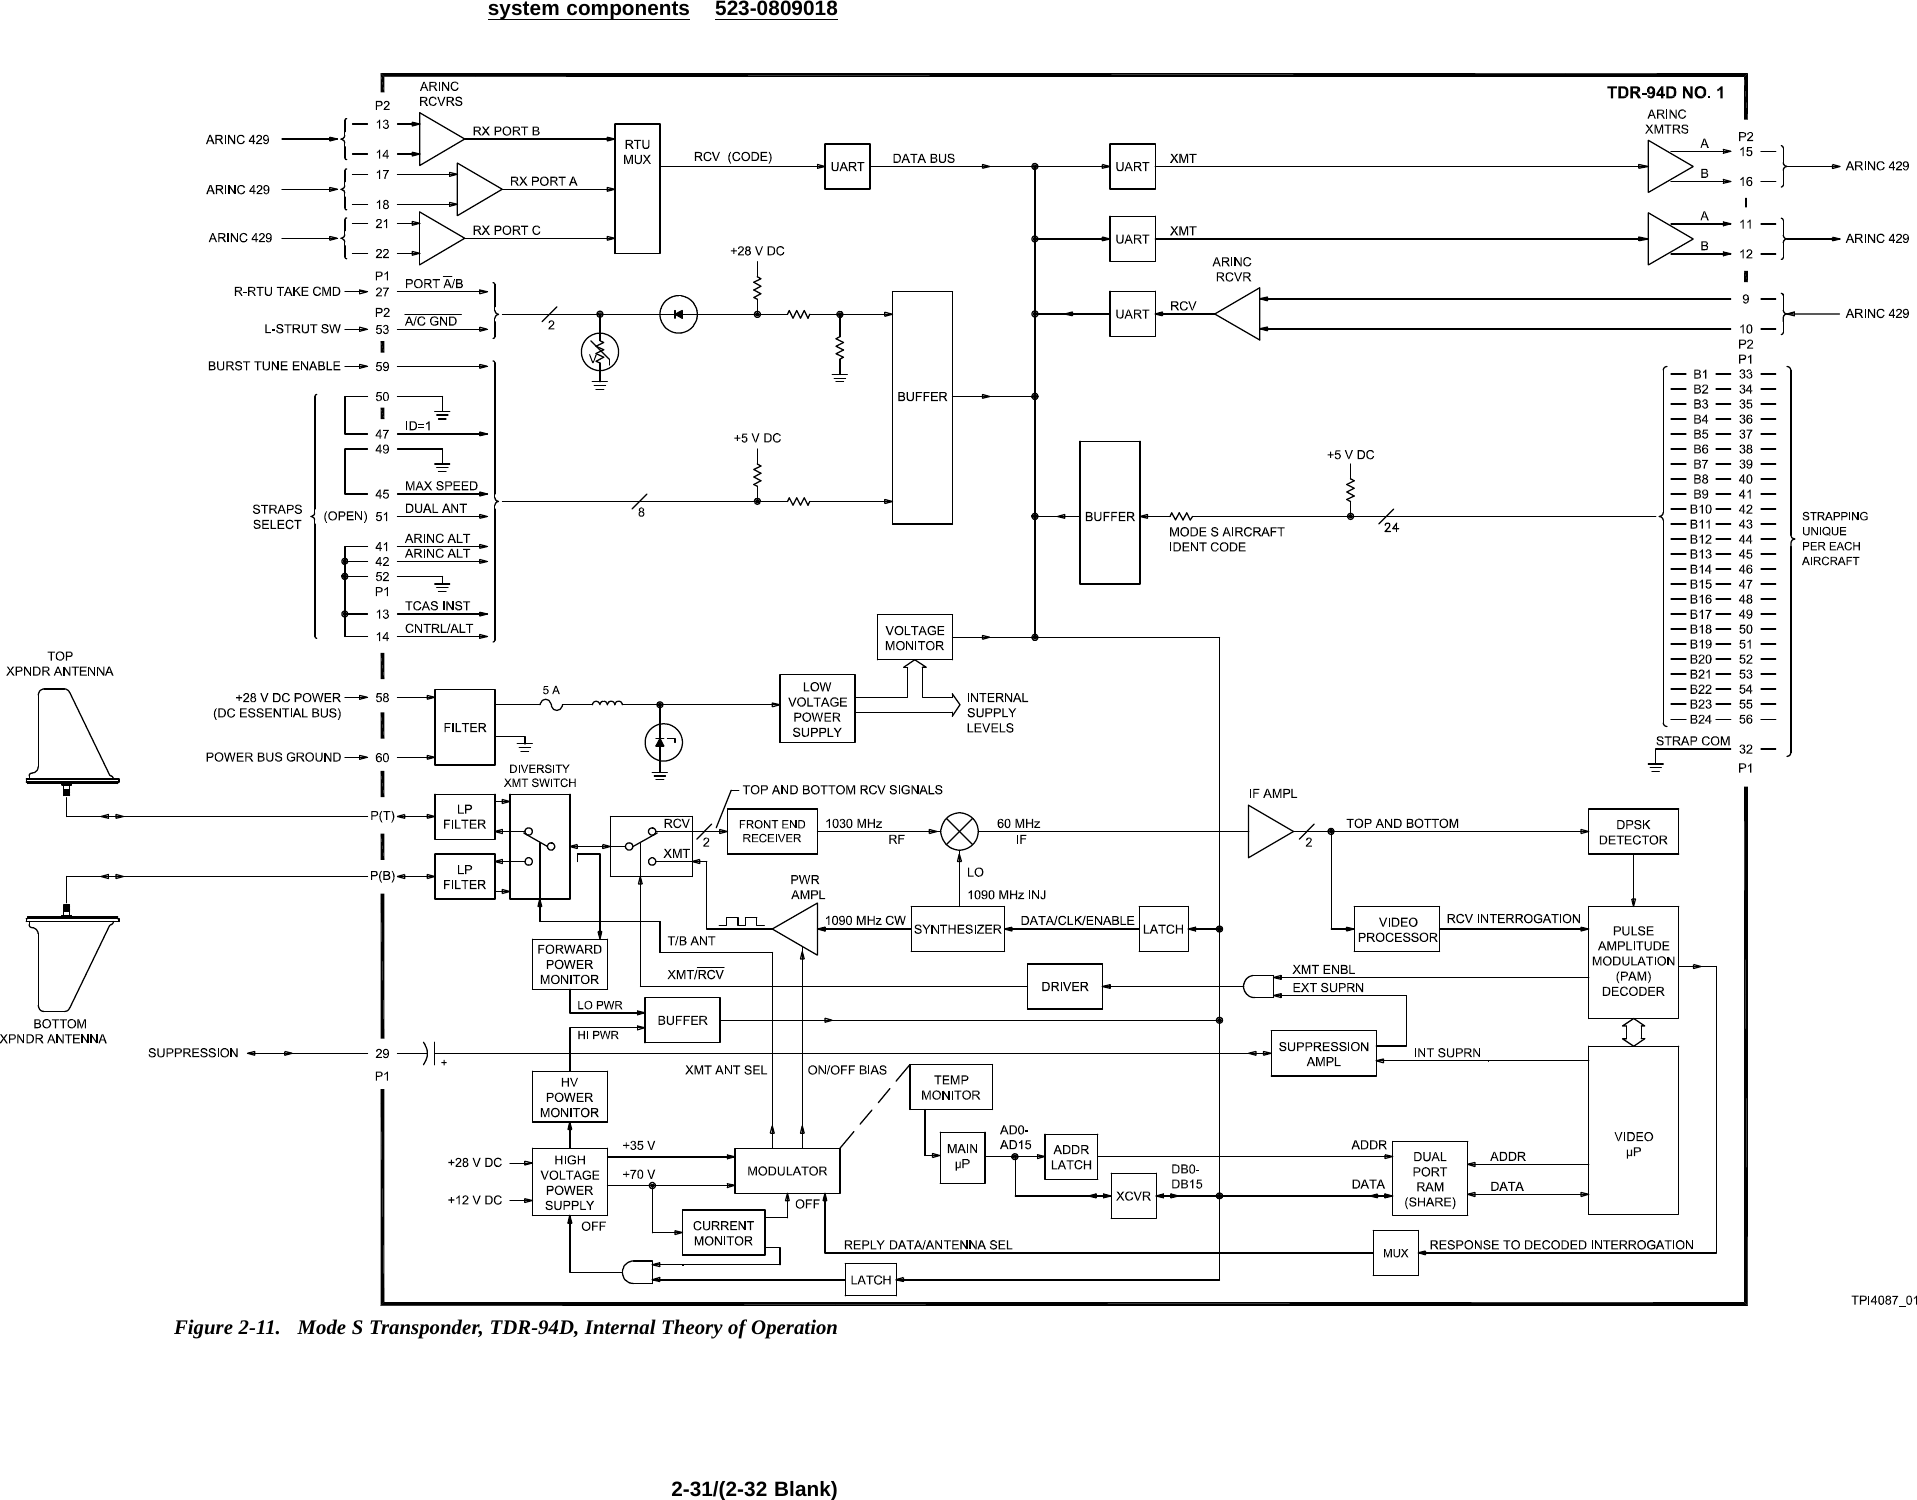 system components 523-0809018Figure 2-11. Mode S Transponder, TDR-94D, Internal Theory of Operation2-31/(2-32 Blank)